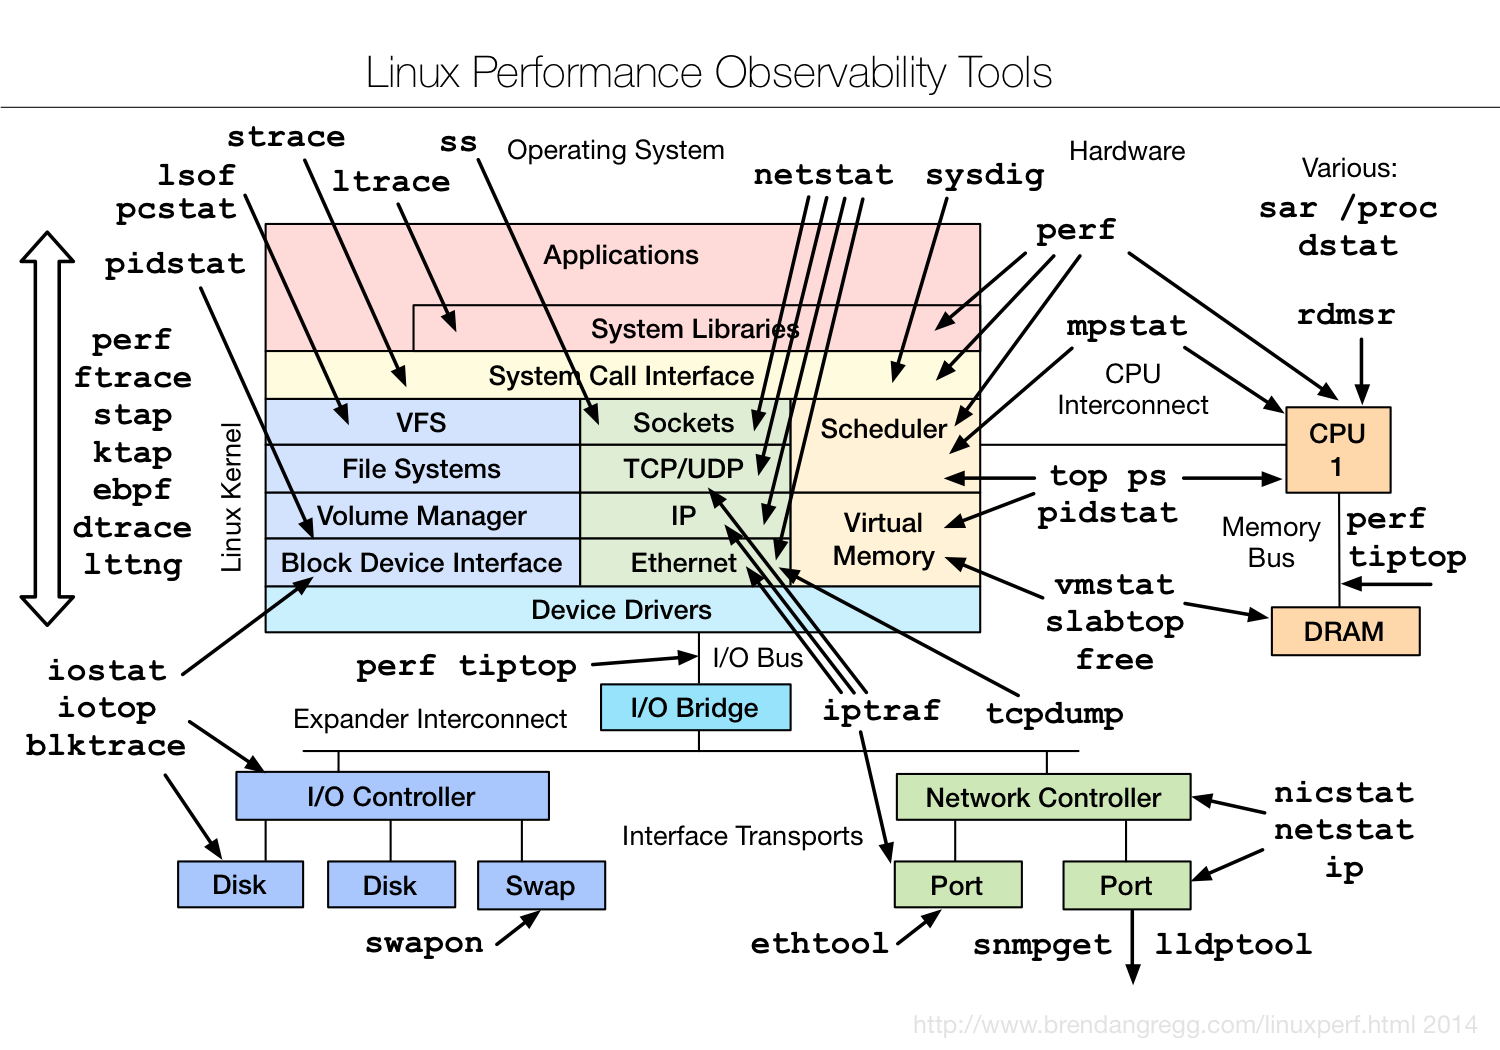 observability tool diagram cache from linux.com